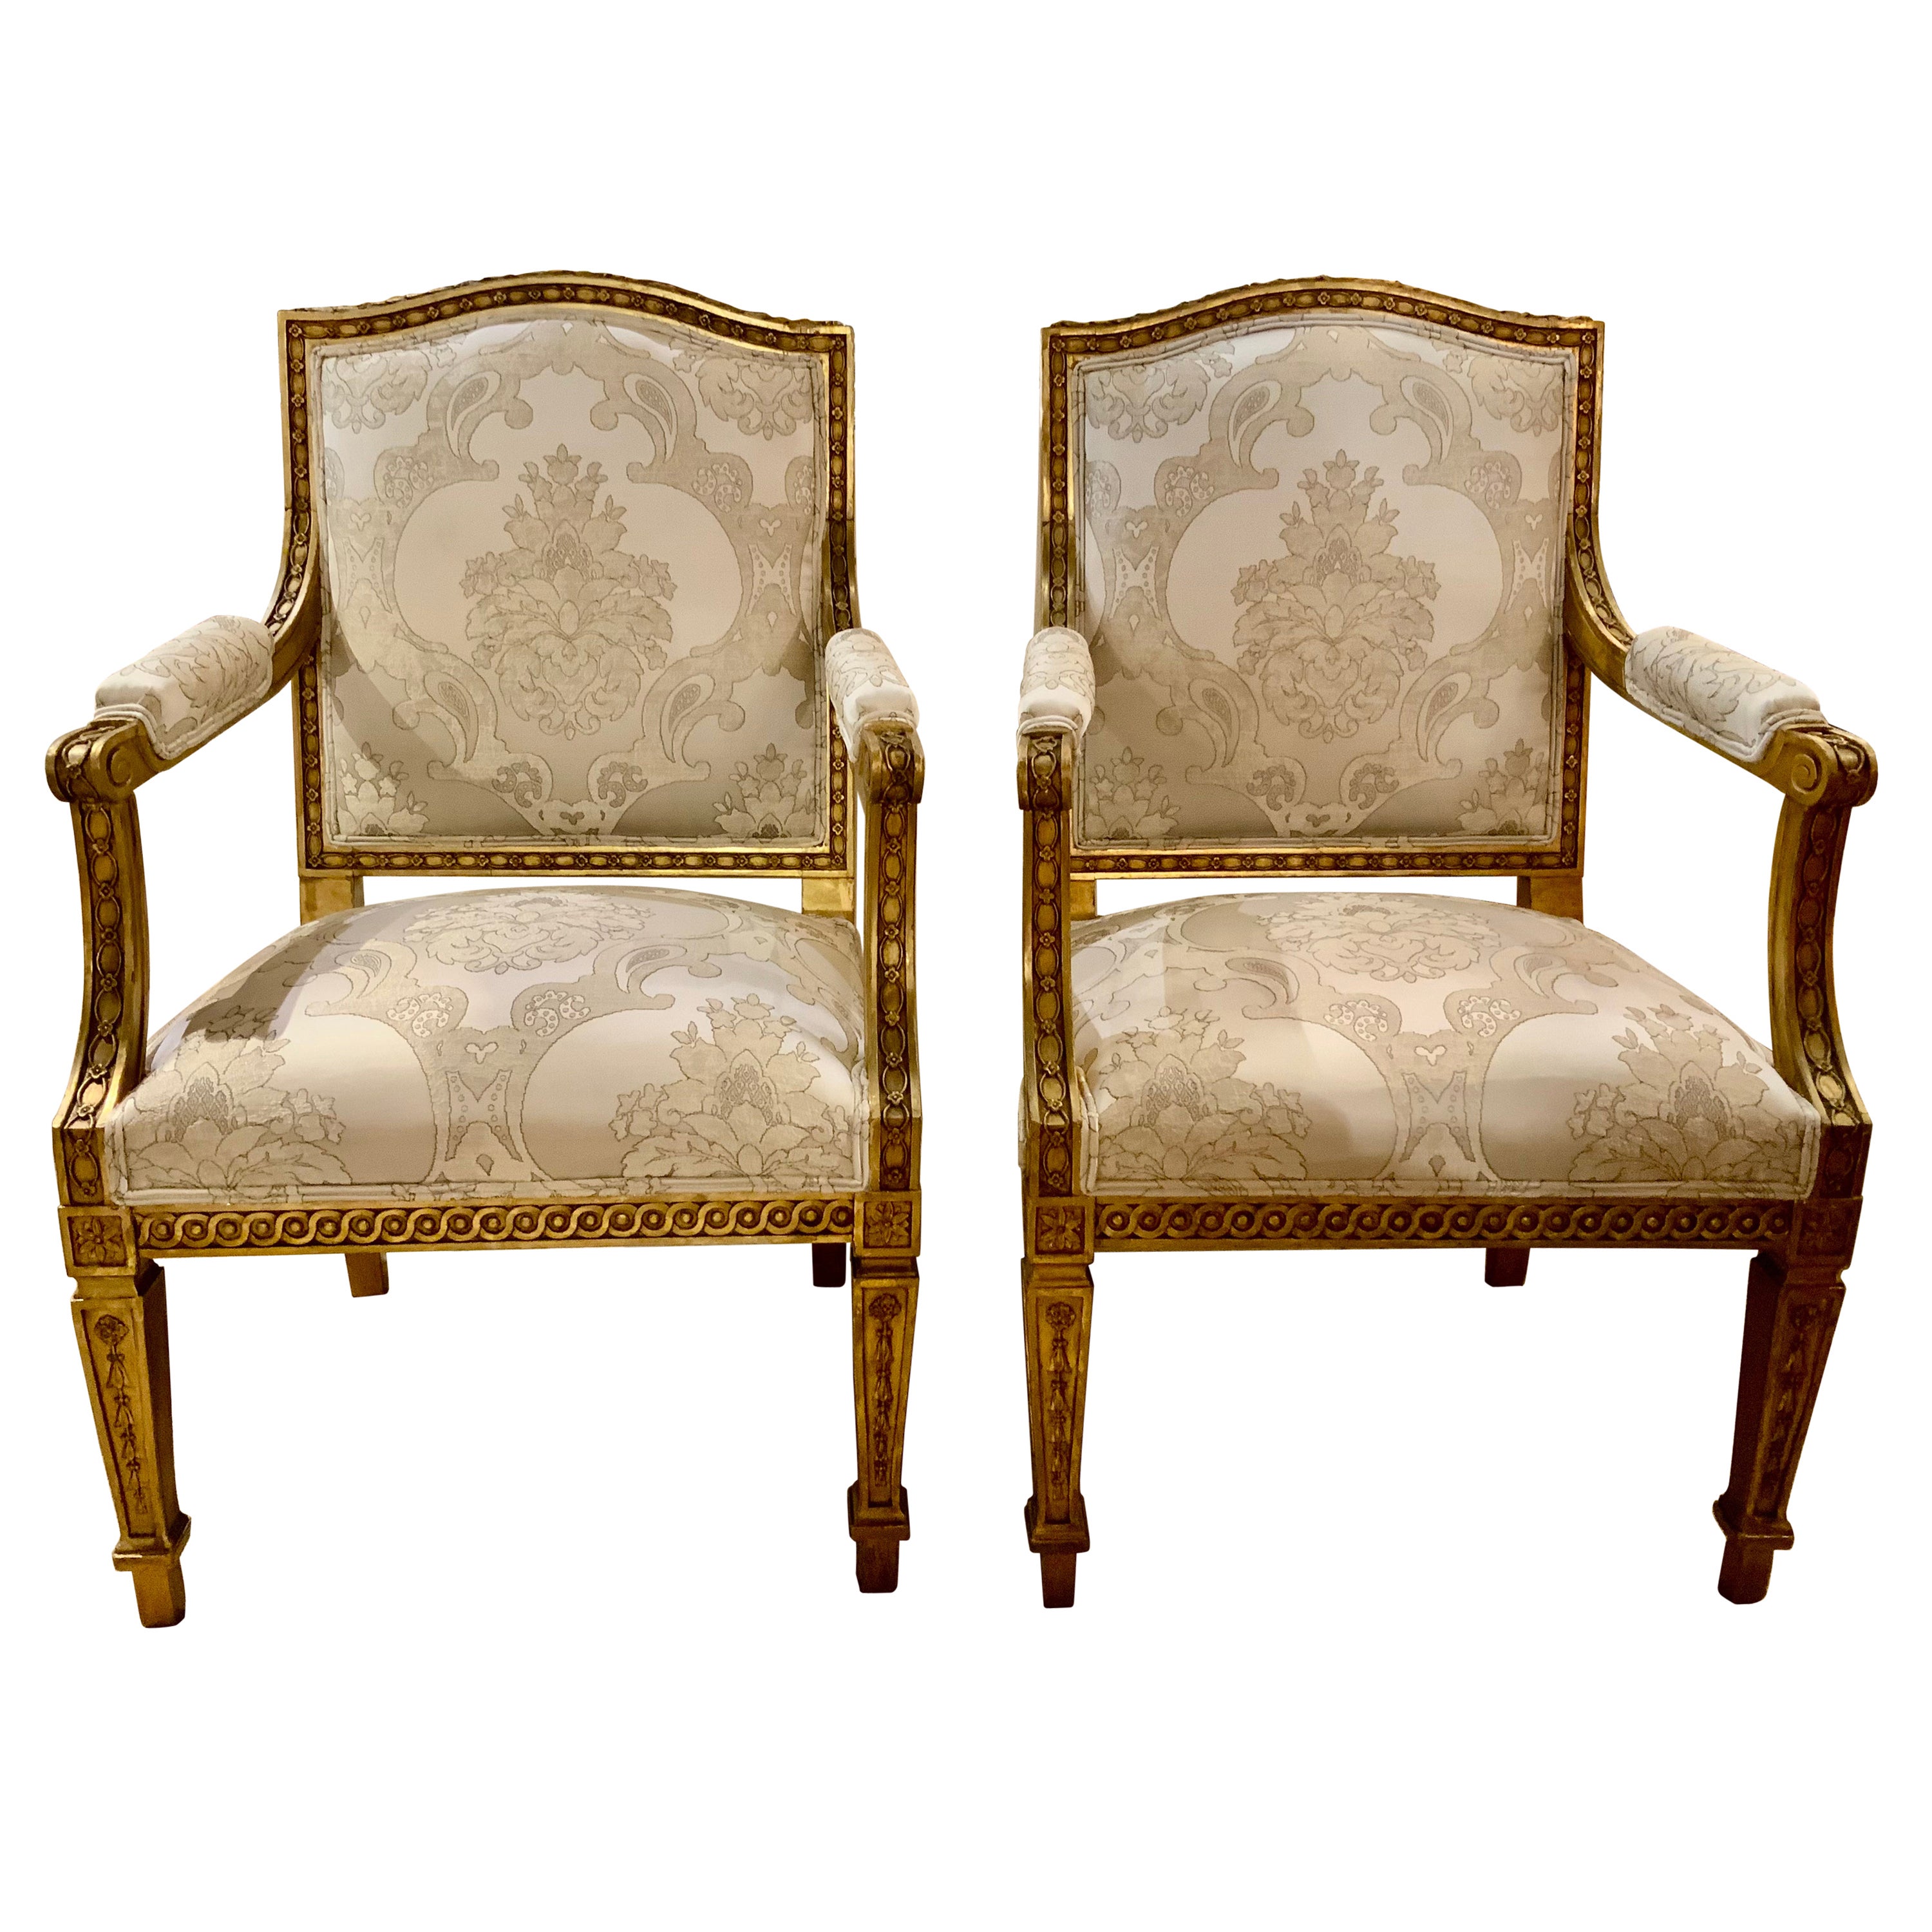 Pair of French Giltwood  Louis XVI-Style Arm Chairs /Fauteuils 19th Century For Sale